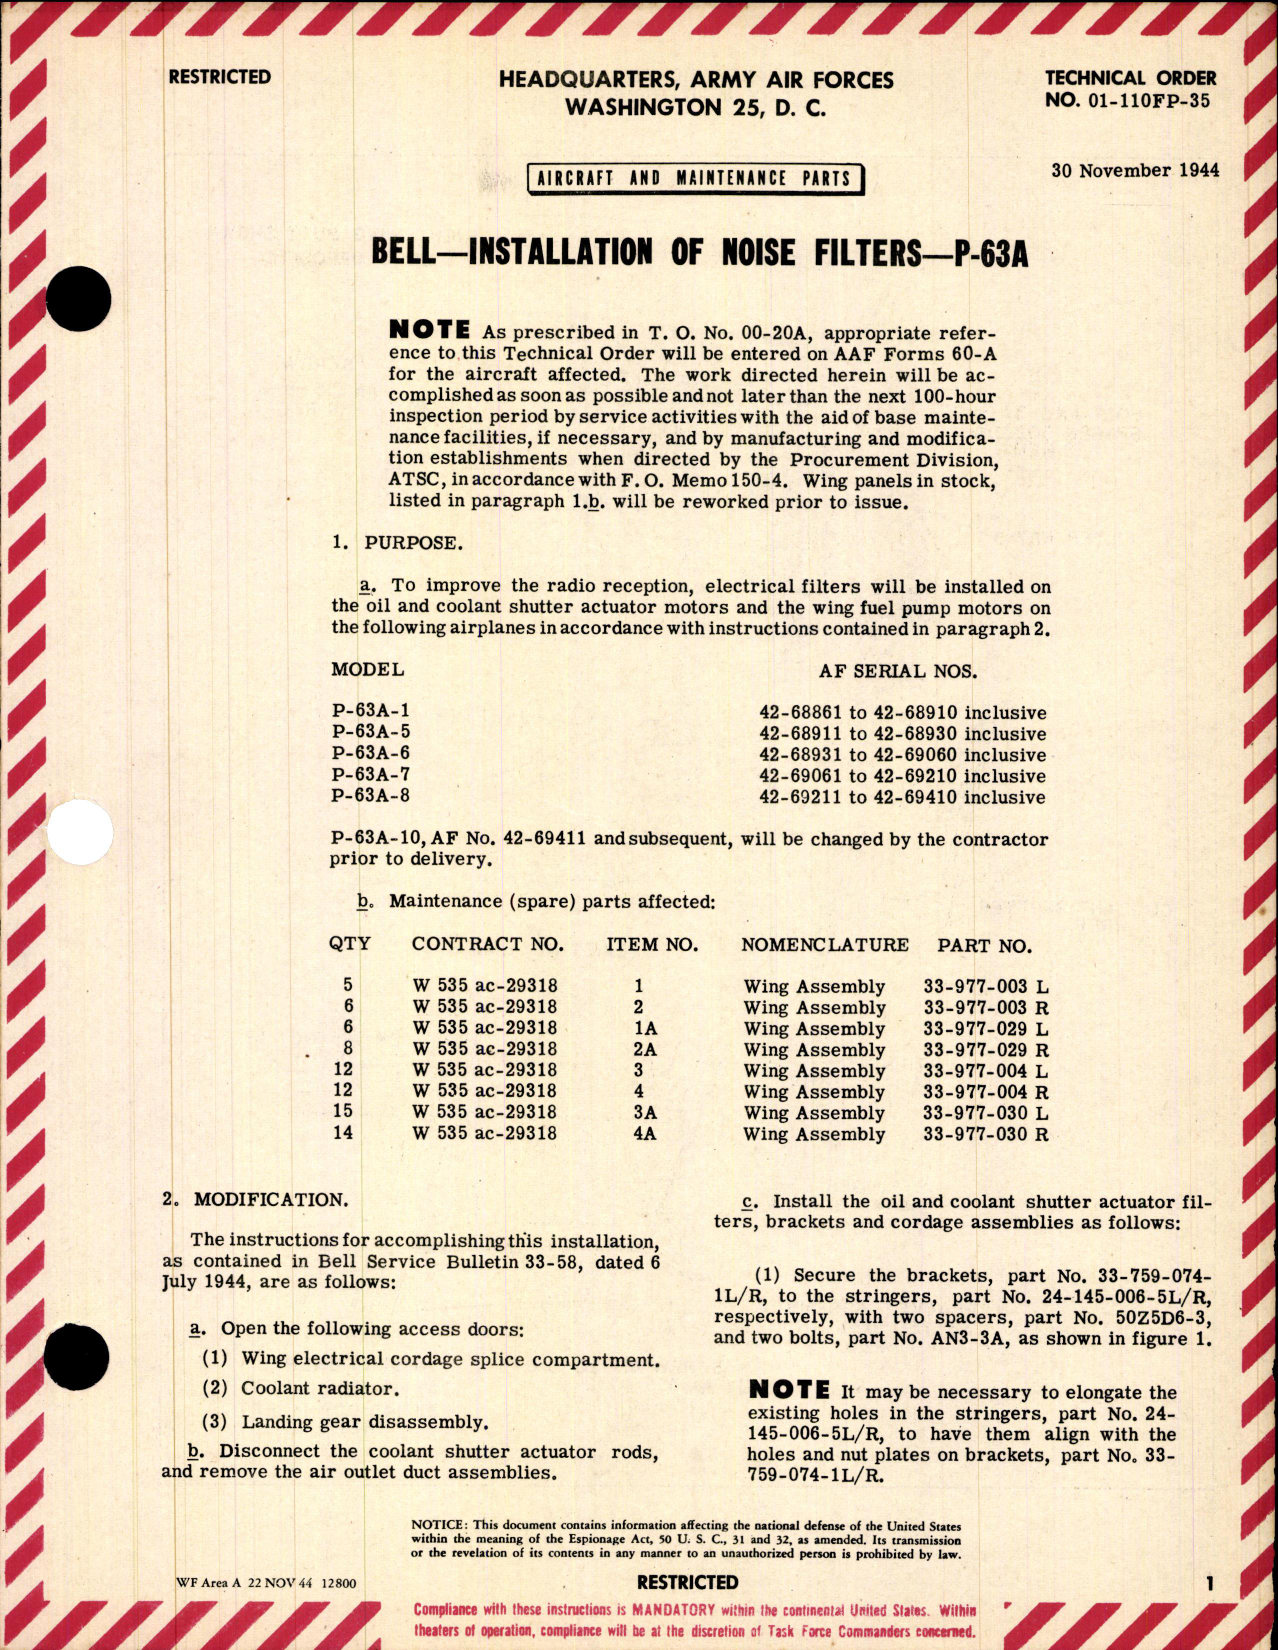 Sample page 1 from AirCorps Library document: Installation of Noise Filters for P-63A